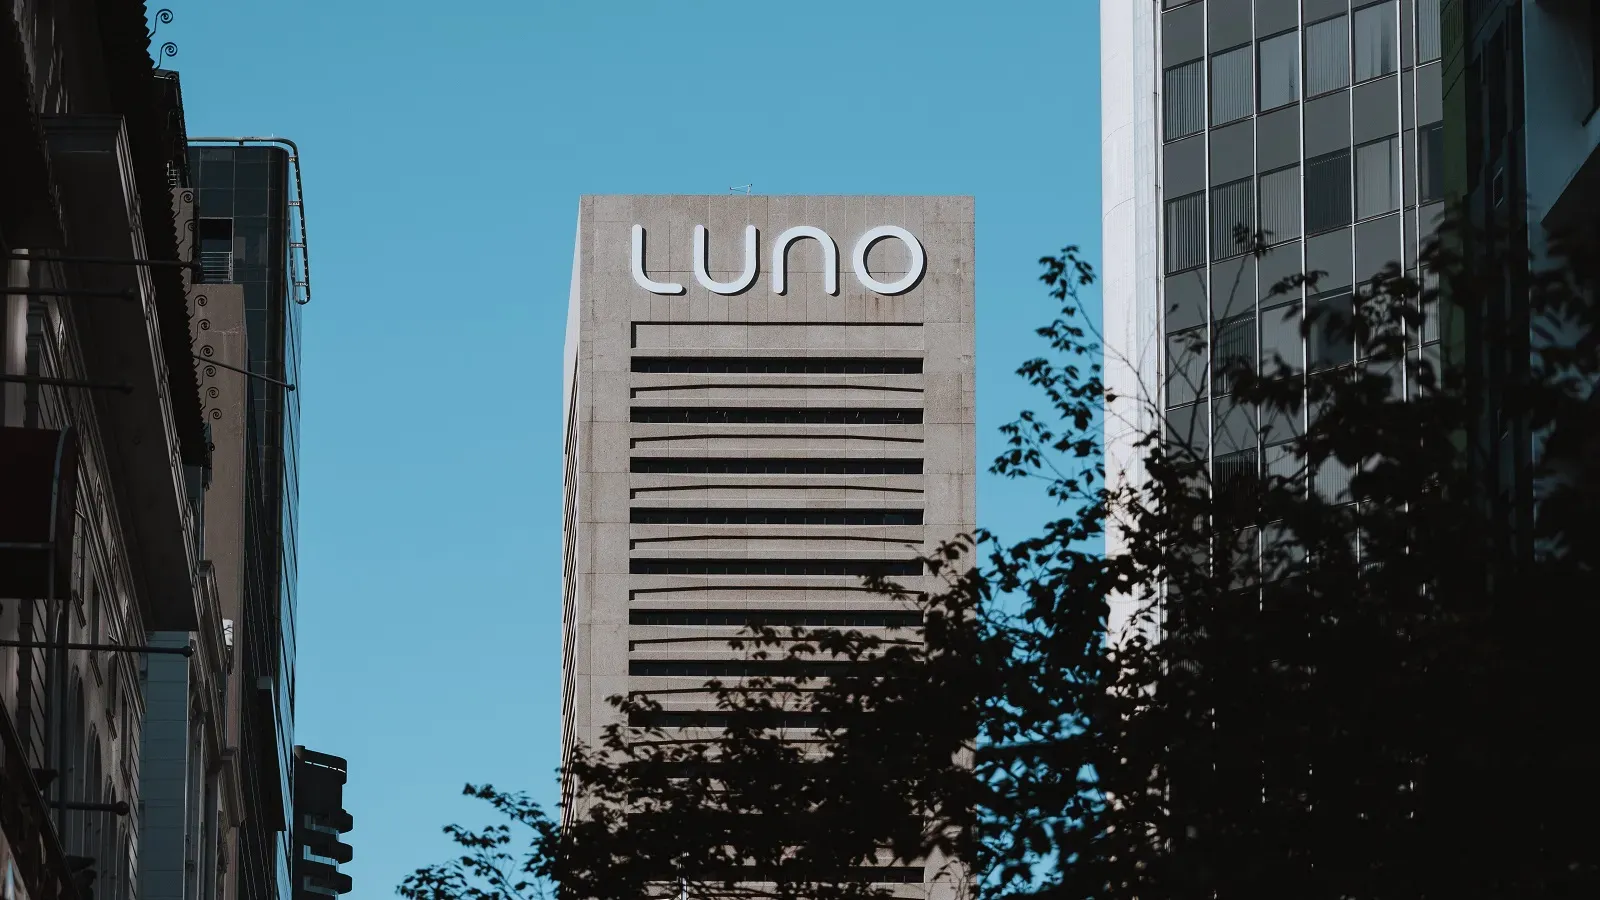 Pioneering Crypto Regulation: South Africa Grants First License to Luno